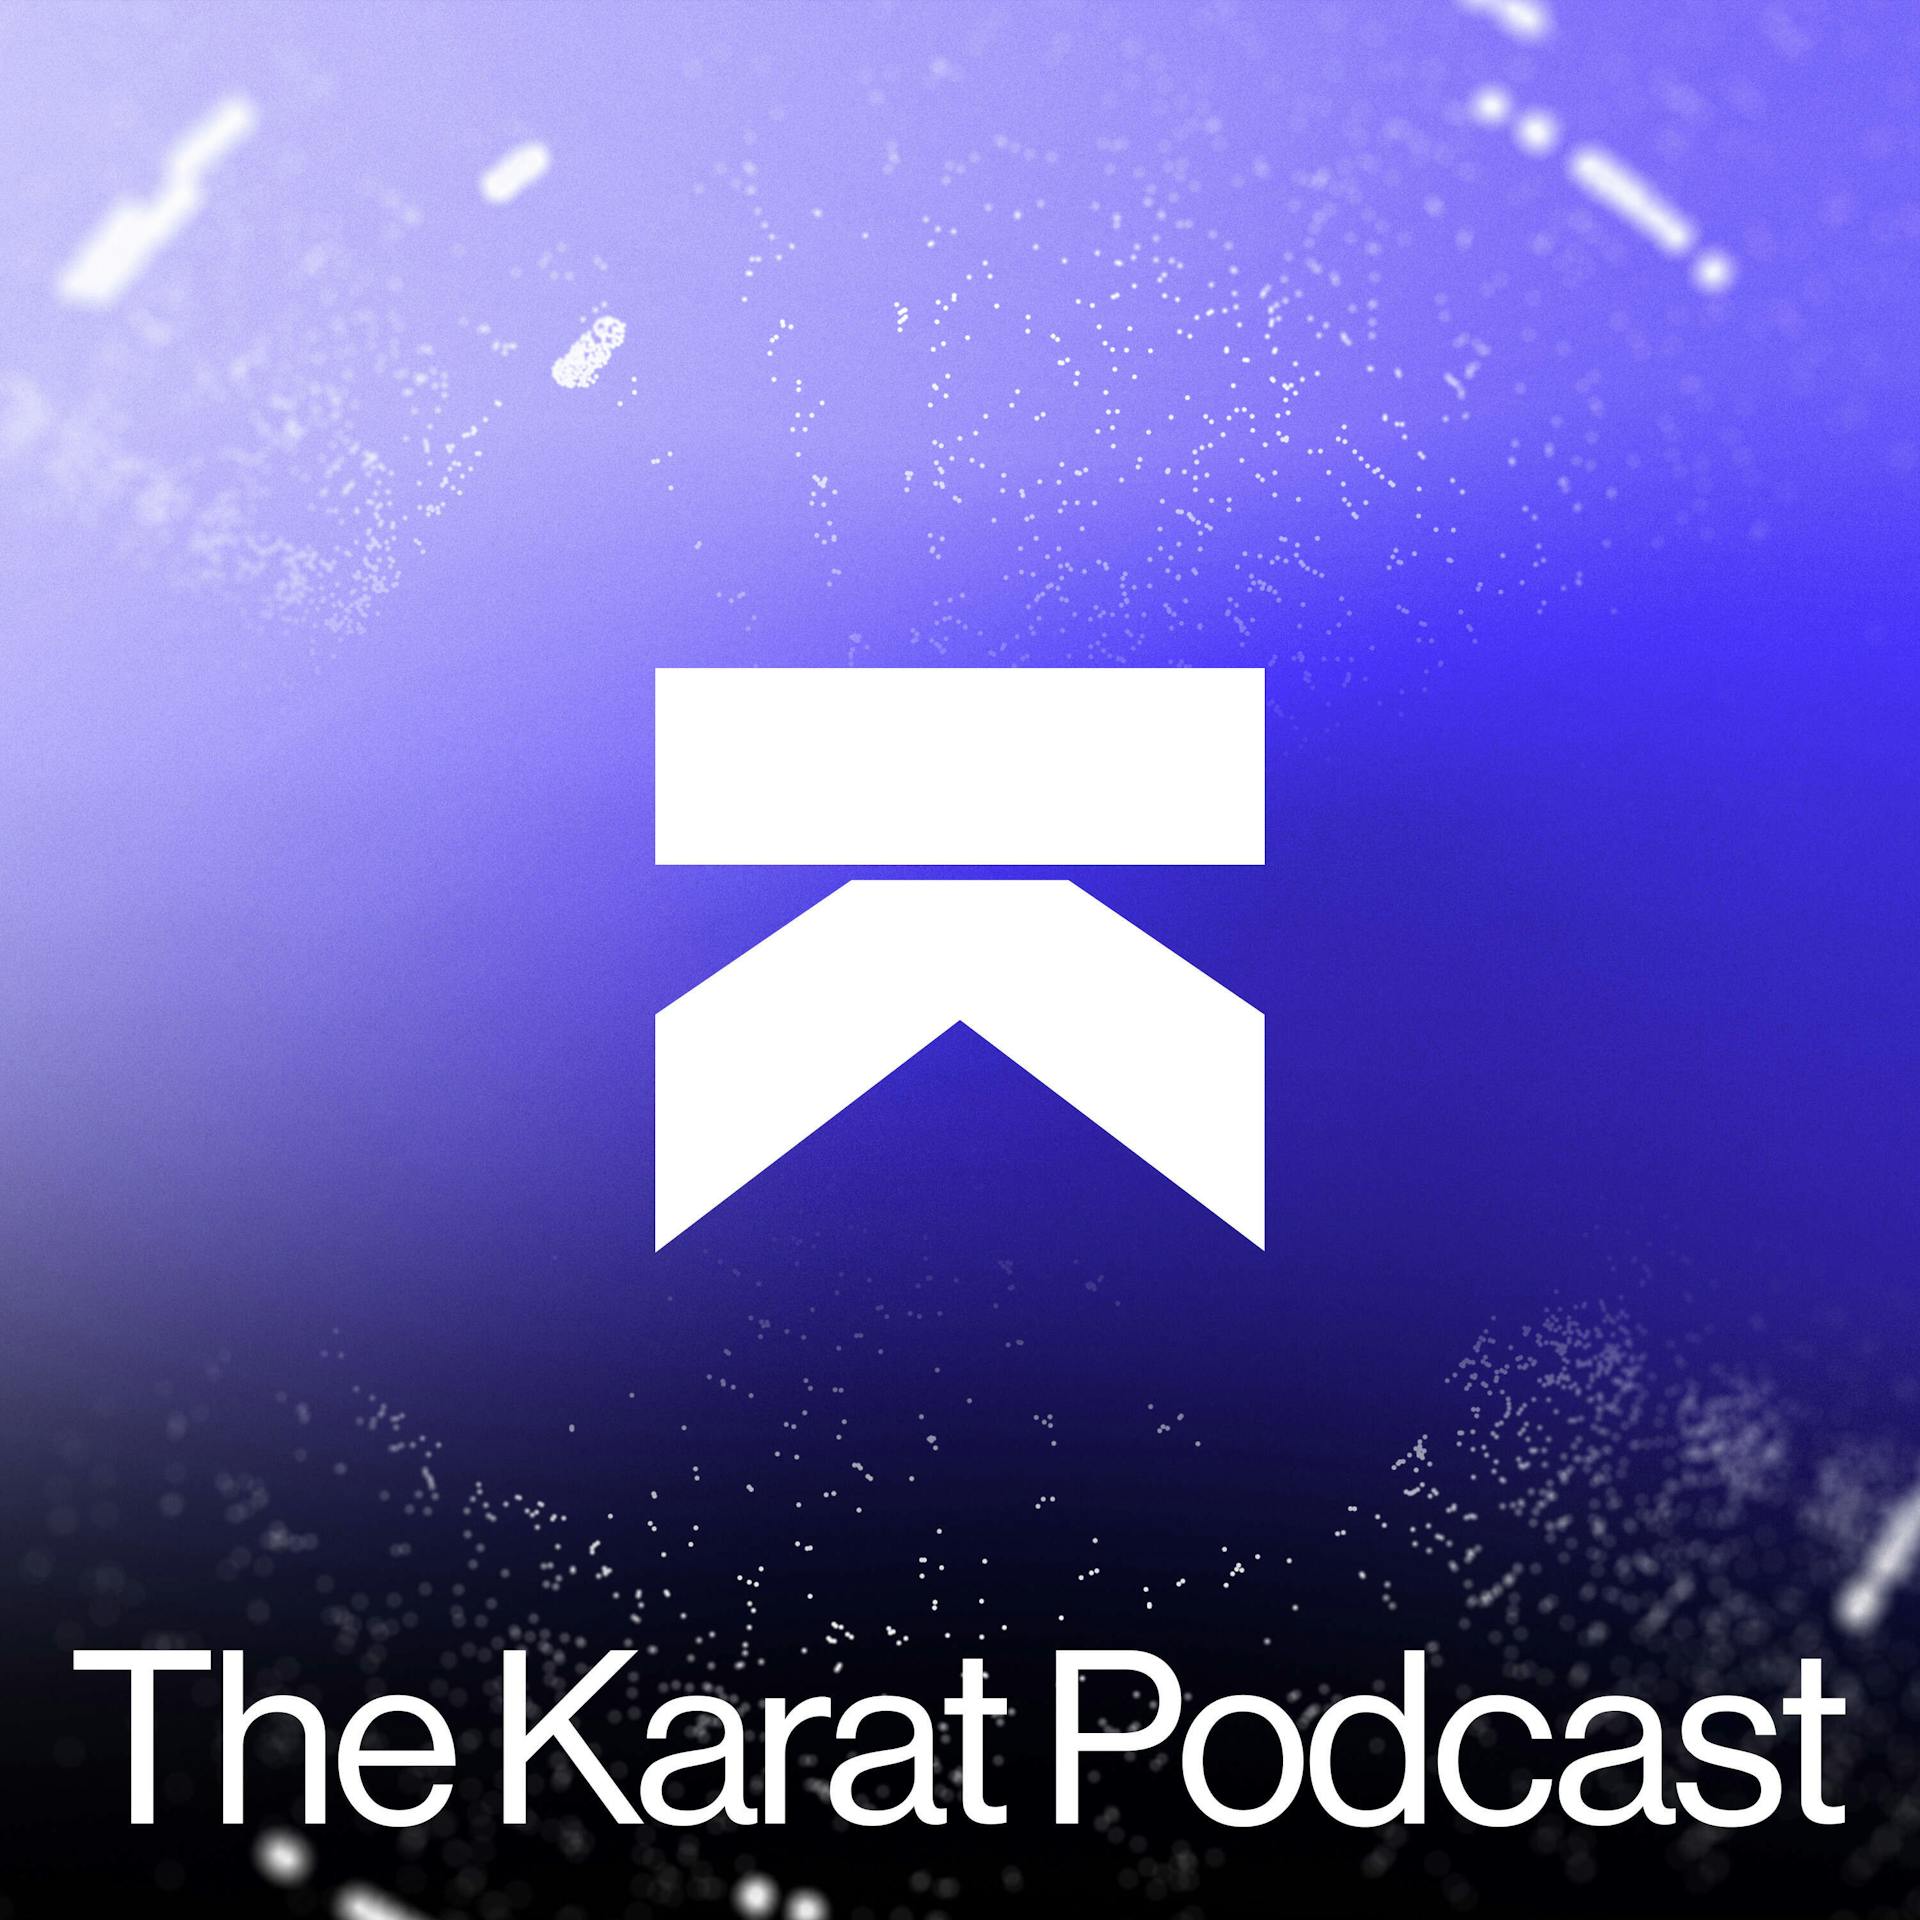 Review: The Karat Podcast